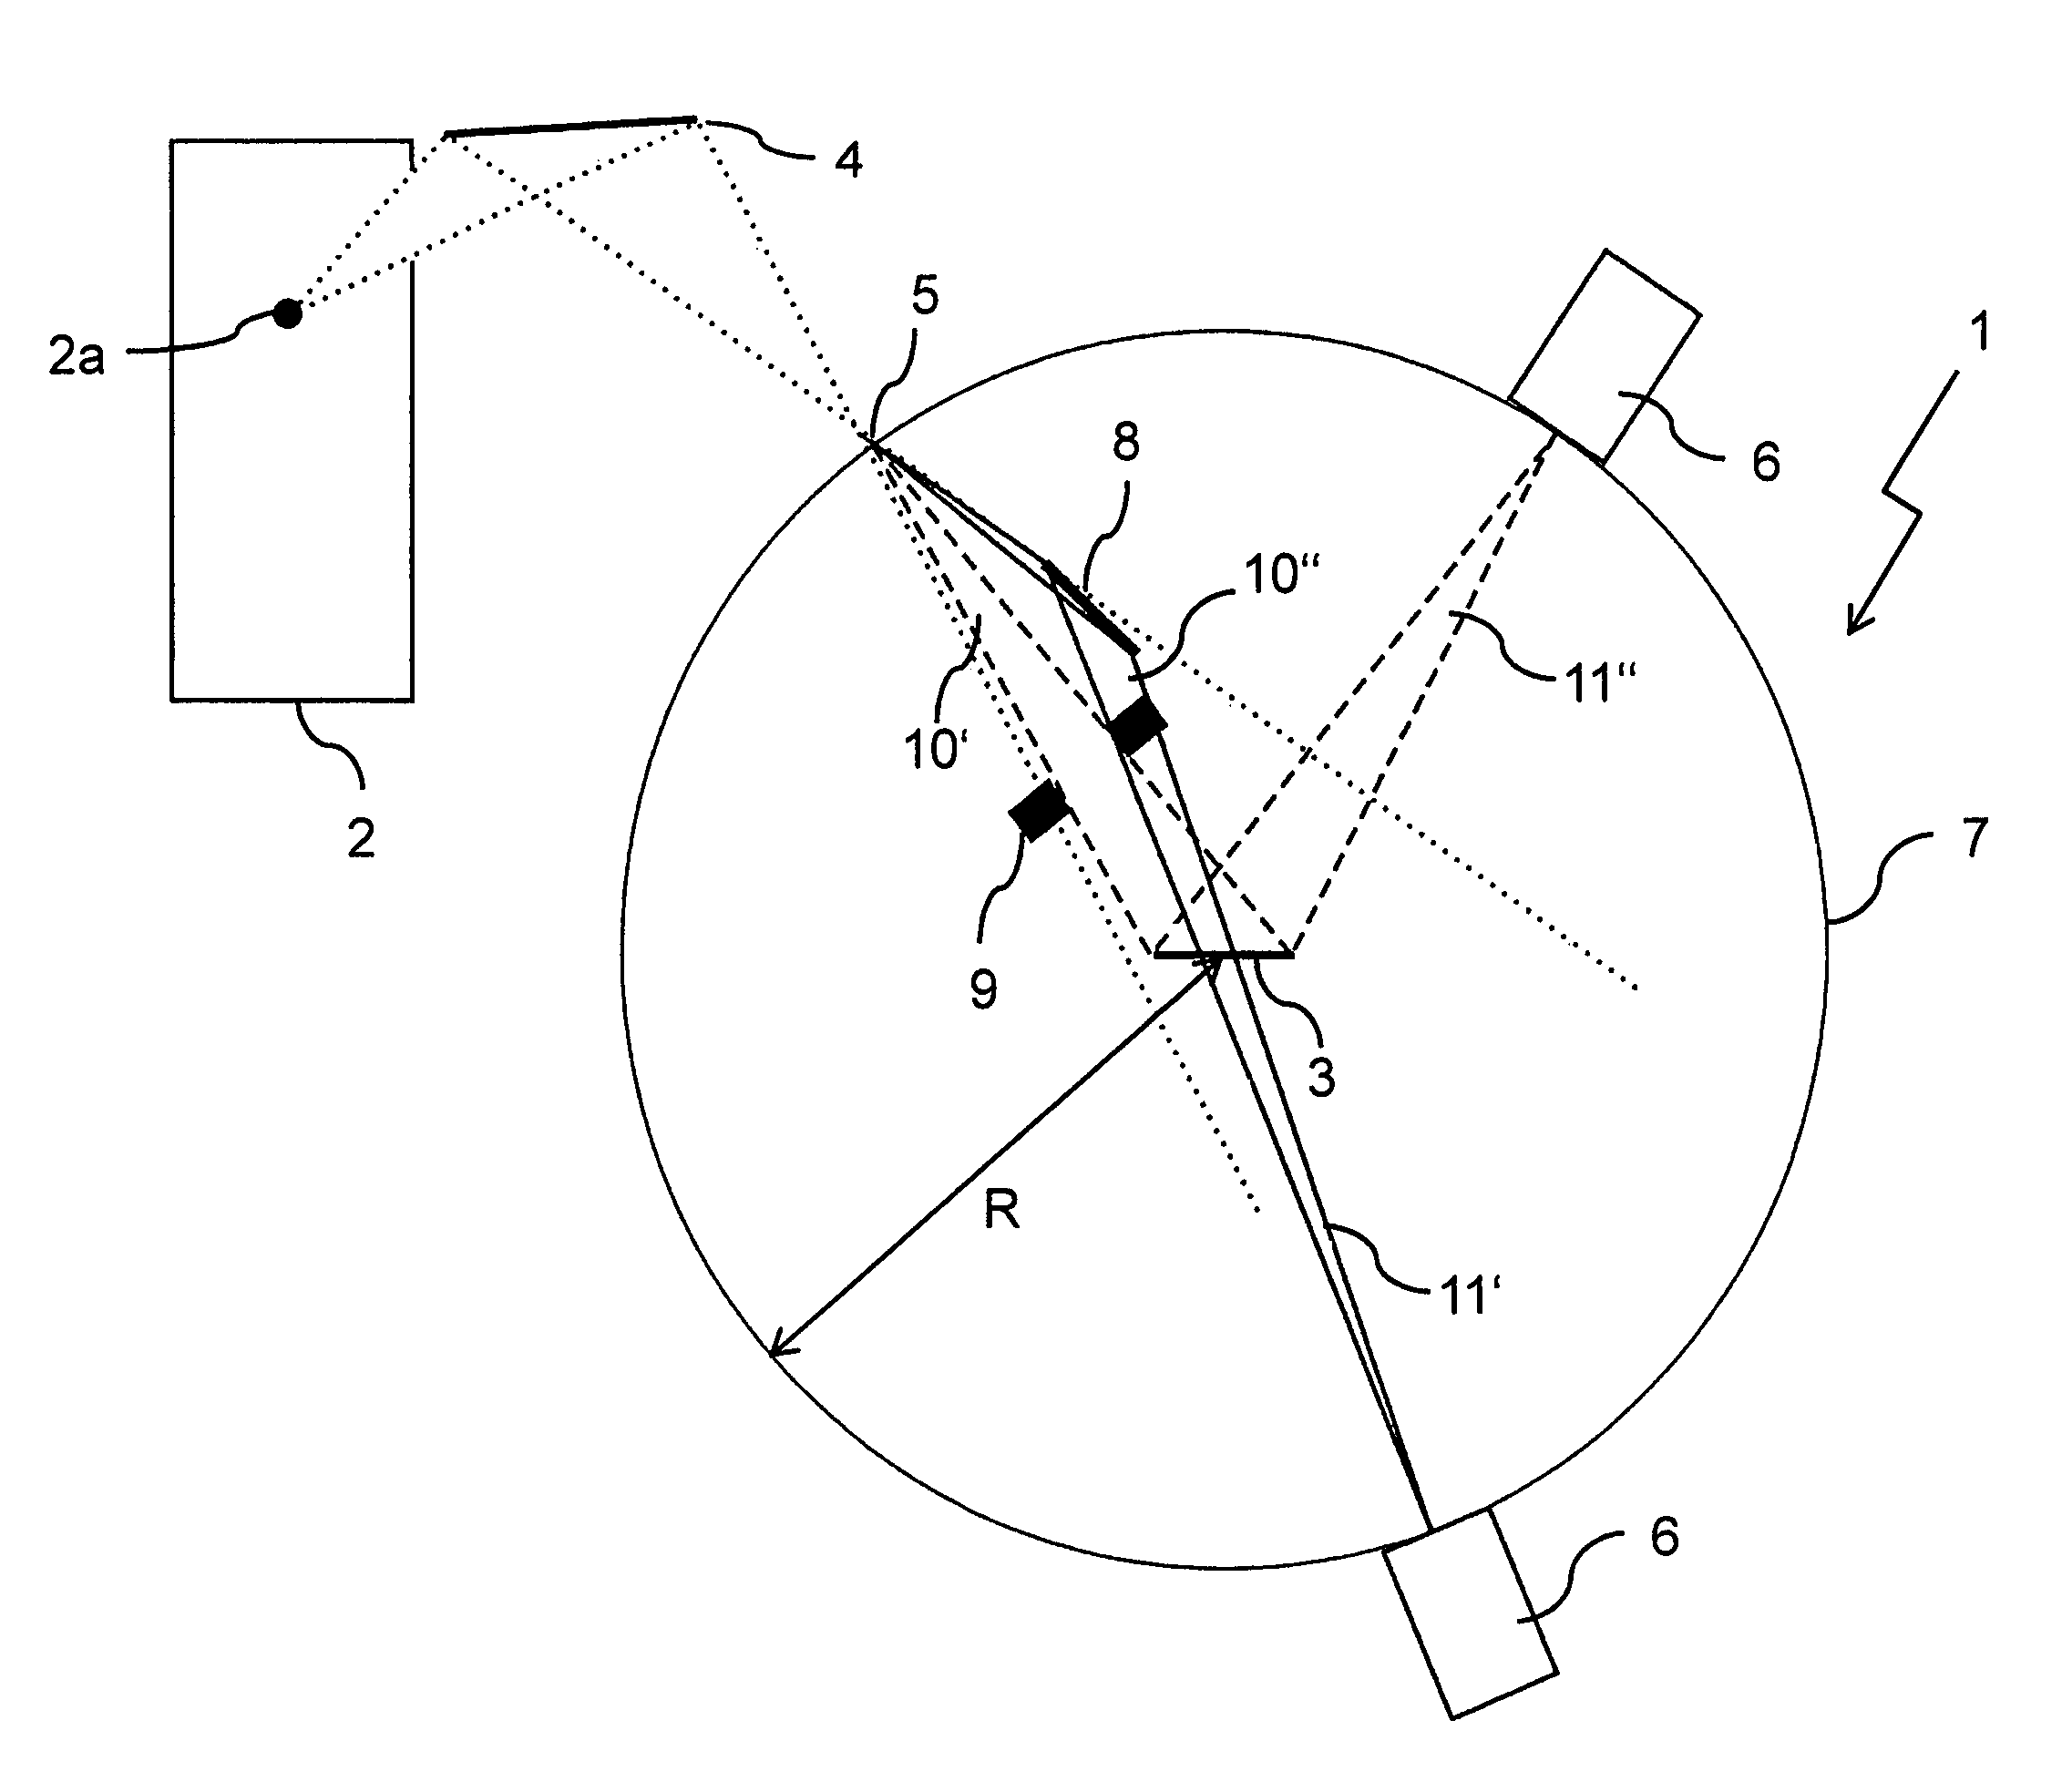 X-ray optical configuration with two focusing elements